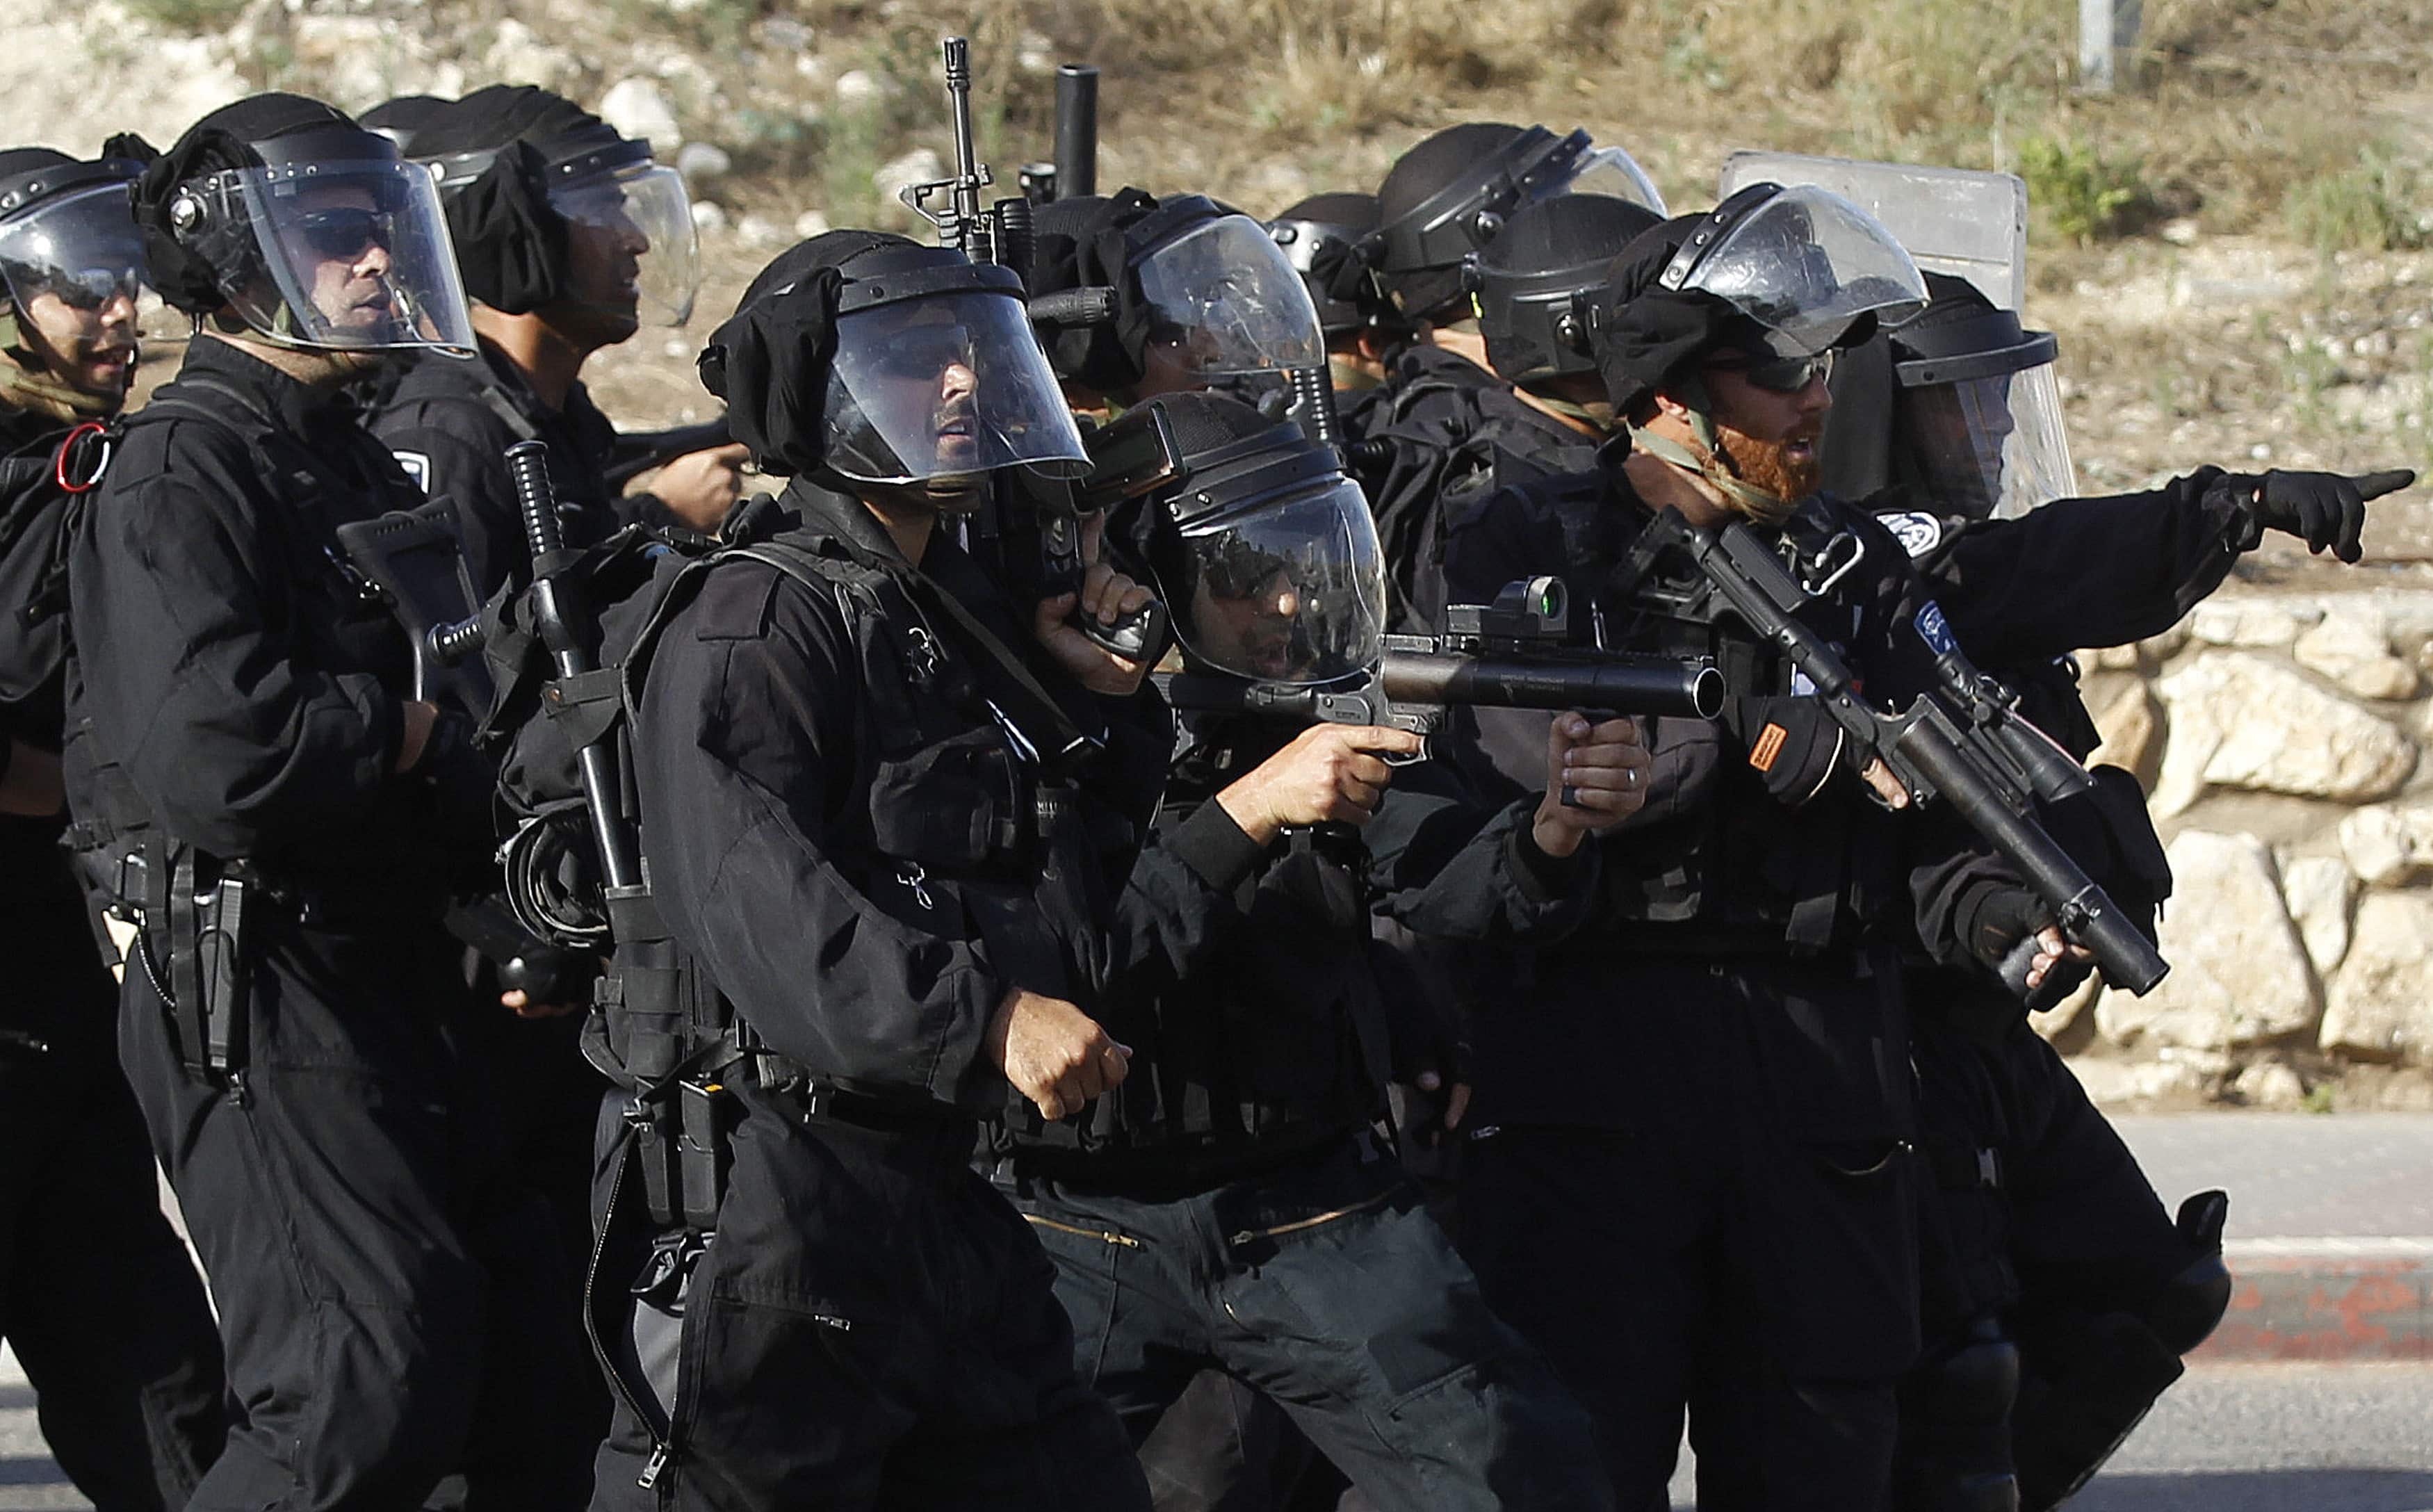 Israeli police take up positions in the Israeli-Arab town of Umm el-Fahm, during a demonstration by protesters against Israel's military operation to search for three missing Israeli teenagers in the occupied West Bank on 27 June 2014, REUTERS/Ammar Awad